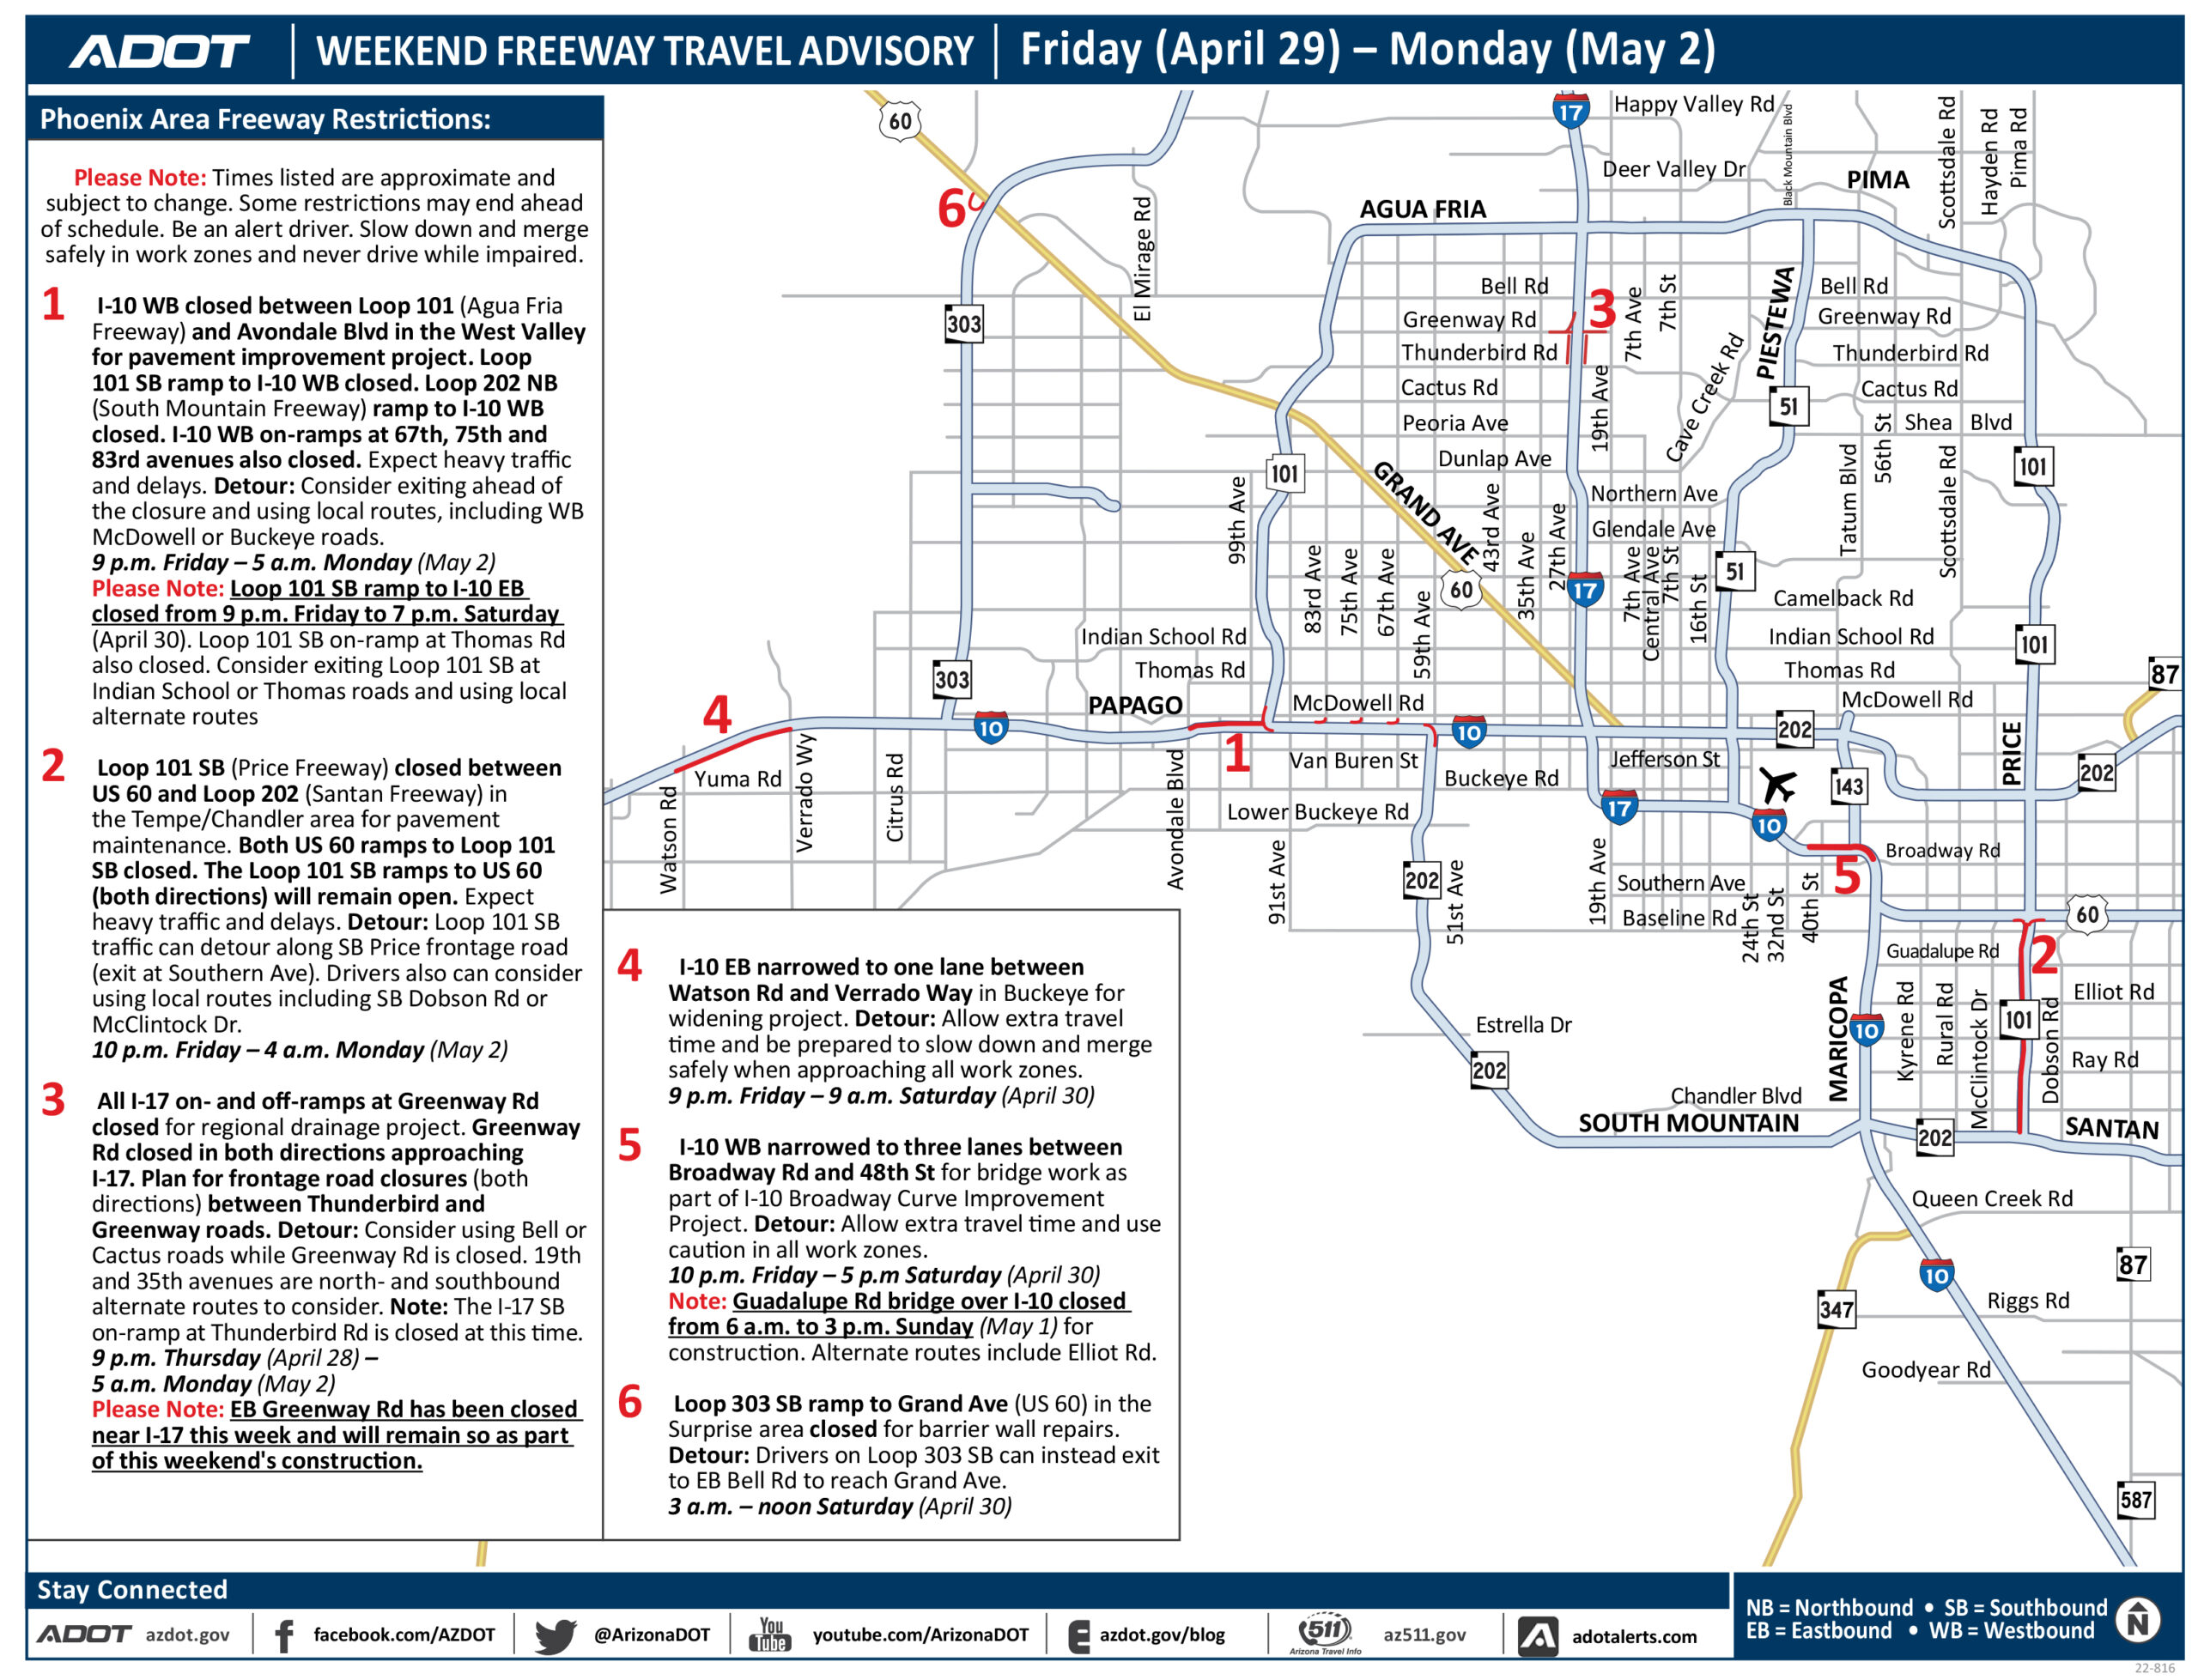 Scheduled closures and restrictions along Phoenix area freeways, April 29 – May 2